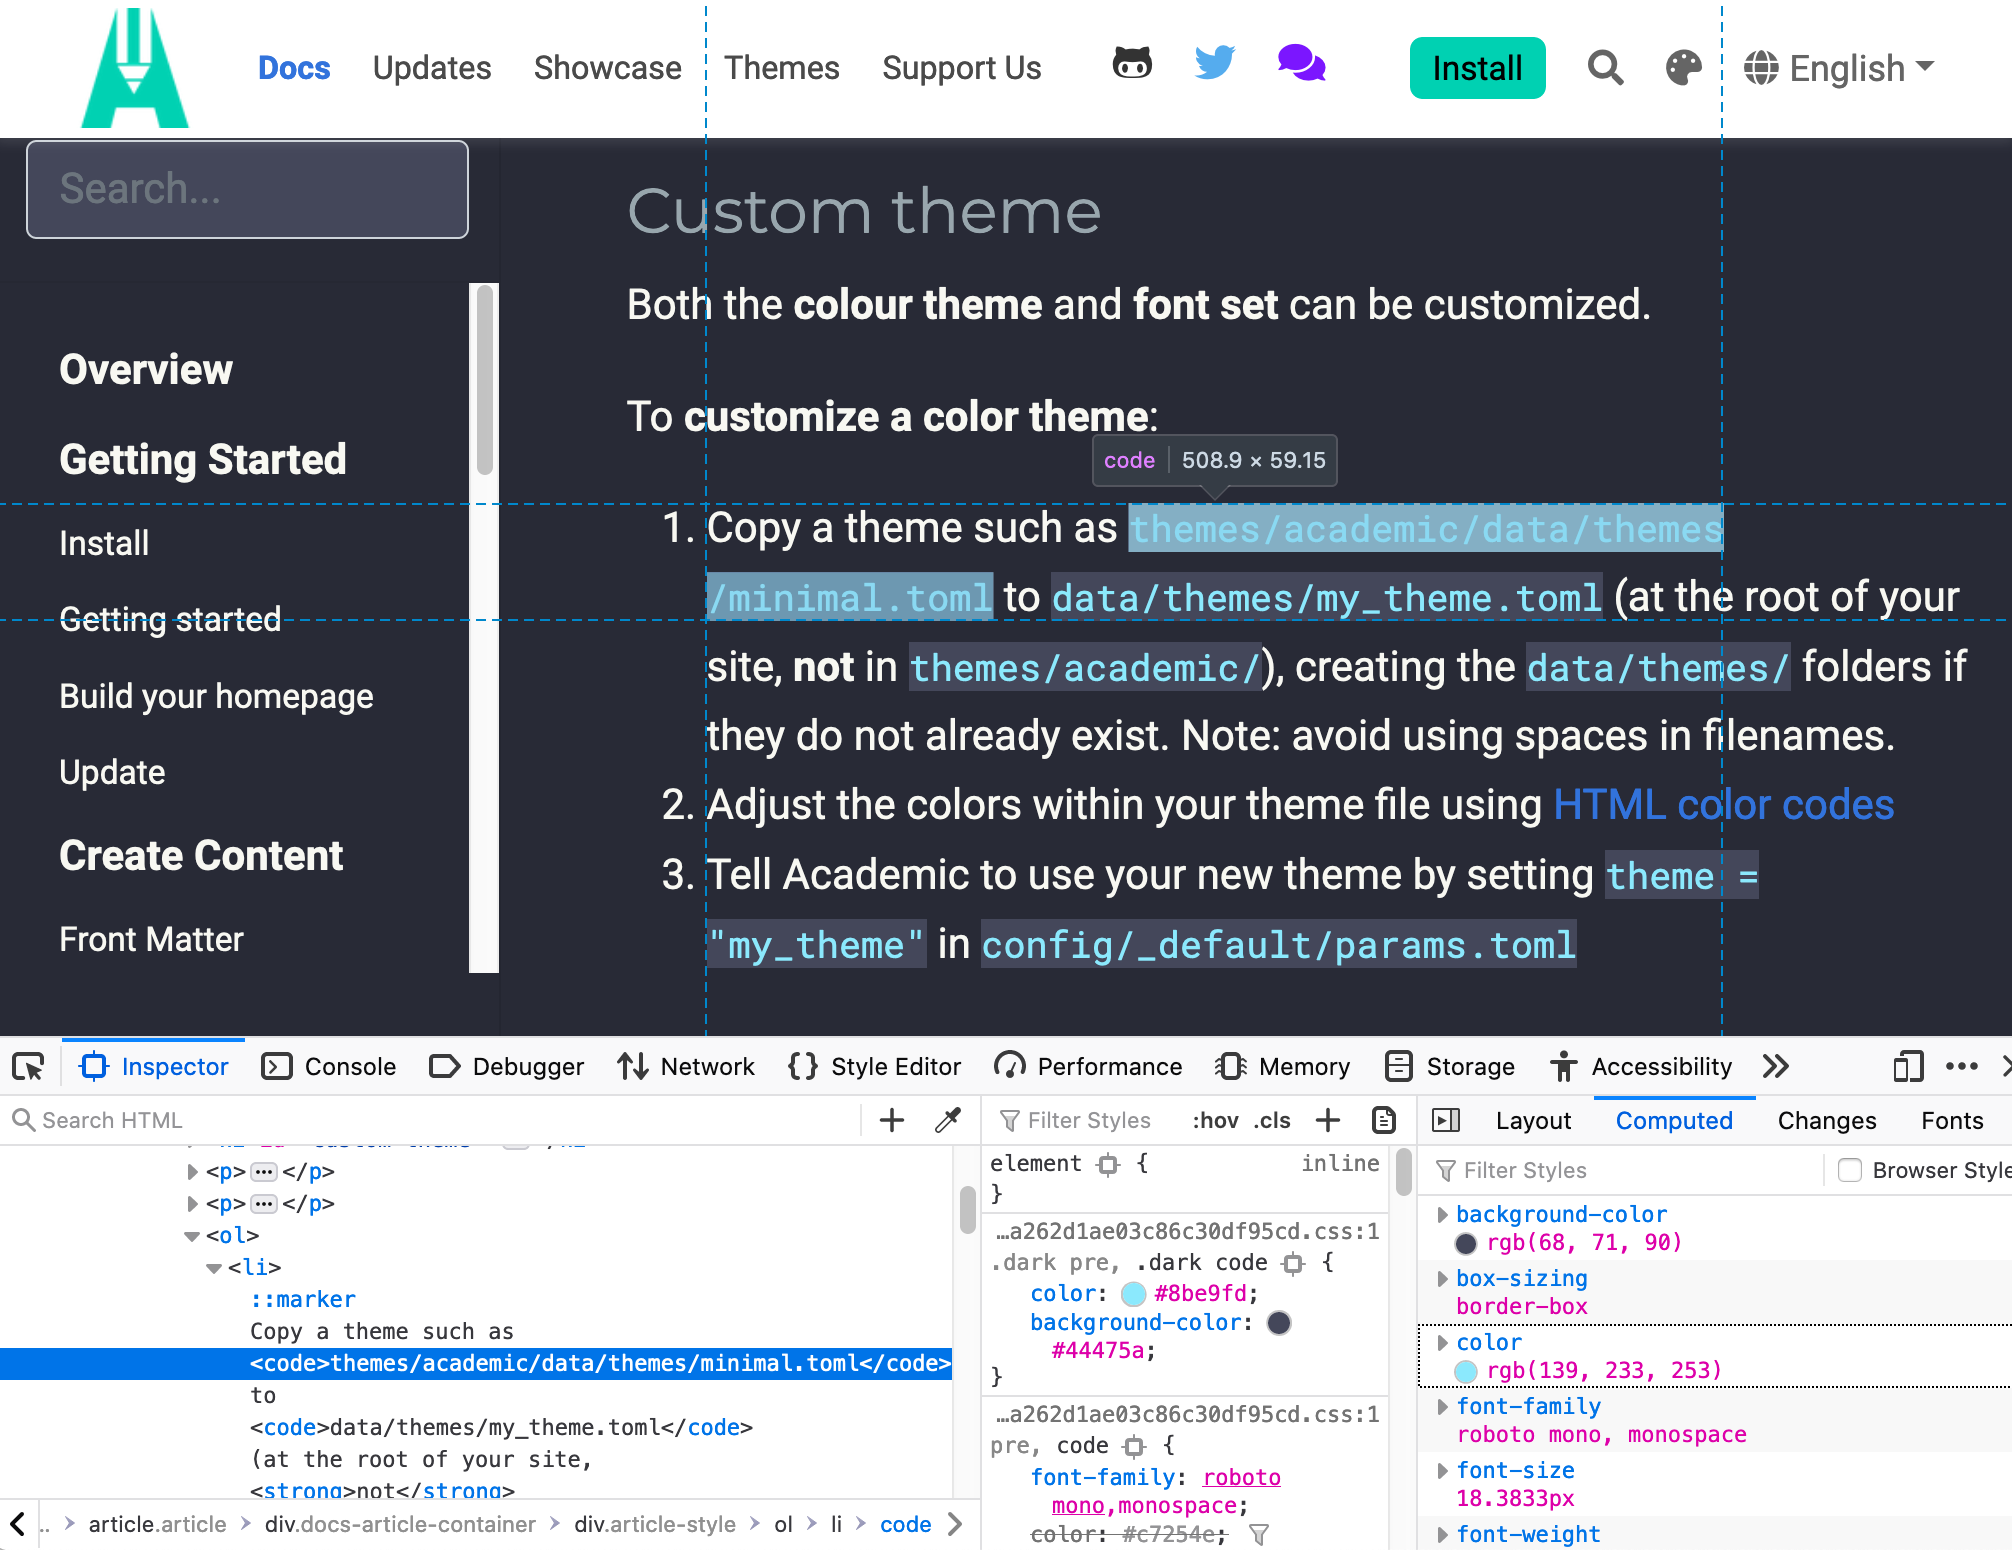 A view of the Firefox web inspector inspecting some inline code available on the Hugo Academic documentation site which used the out-of-the-box dark mode colors. The inspector reveals that the selected text was styled by the CSS code chunk included earlier and includes color previews so you can visually identify elements by color.